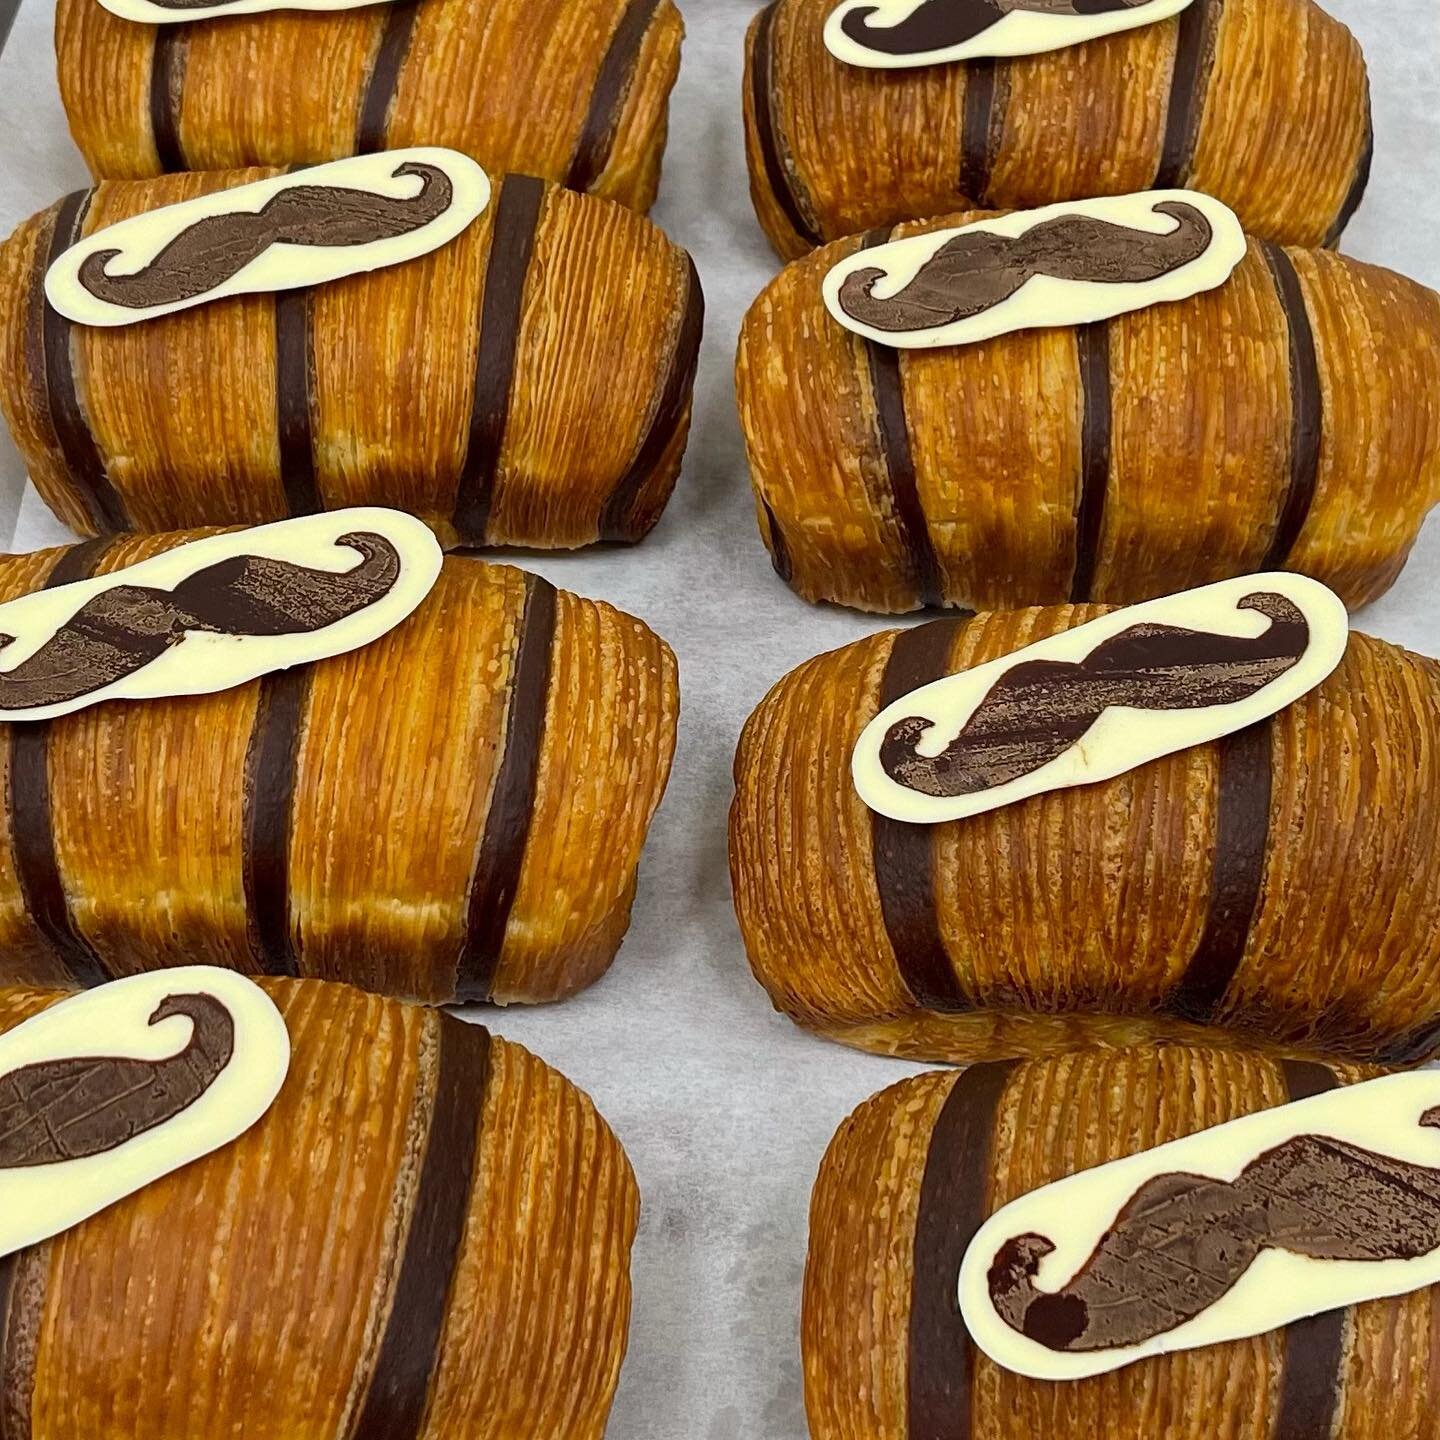 Happy Father&rsquo;s Day!  Bonne F&ecirc;te des P&egrave;res!
We baked some croissants with pecan/hazelnut brownie and a chocolate moustache as well as blueberry and apricot tartes for today.